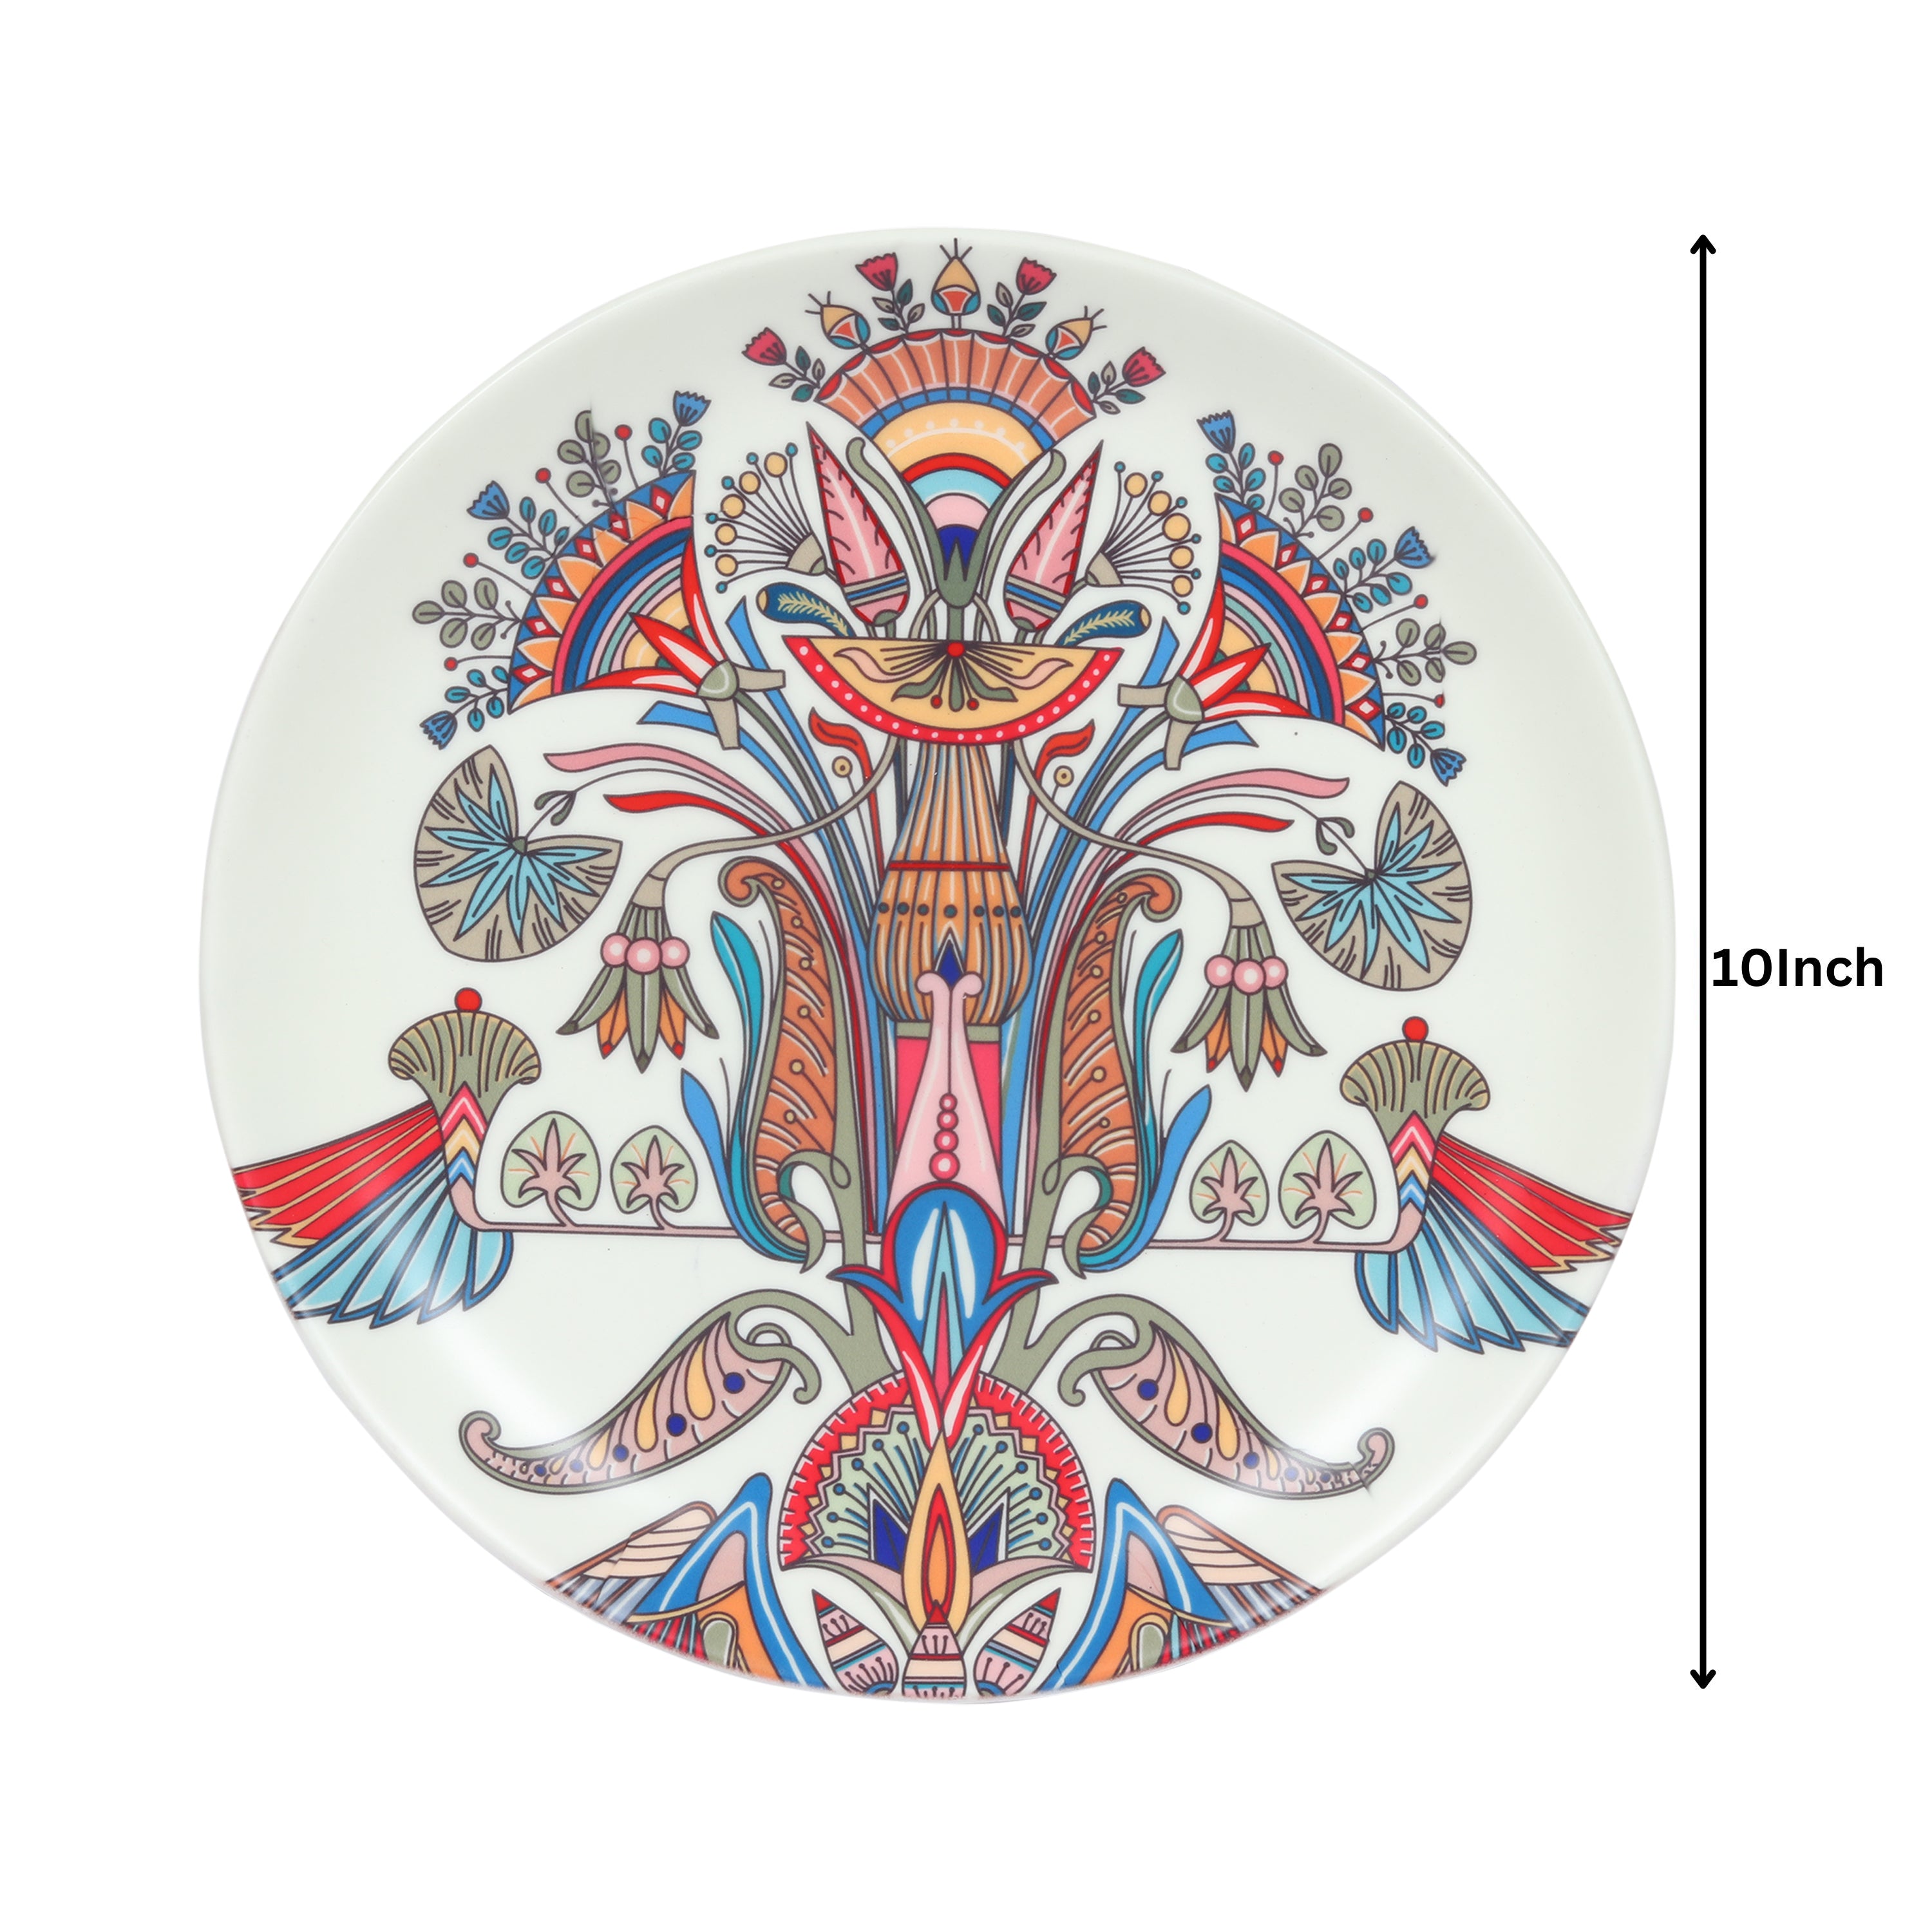 Decorative Wall Plate - The Sesen White Egyptian